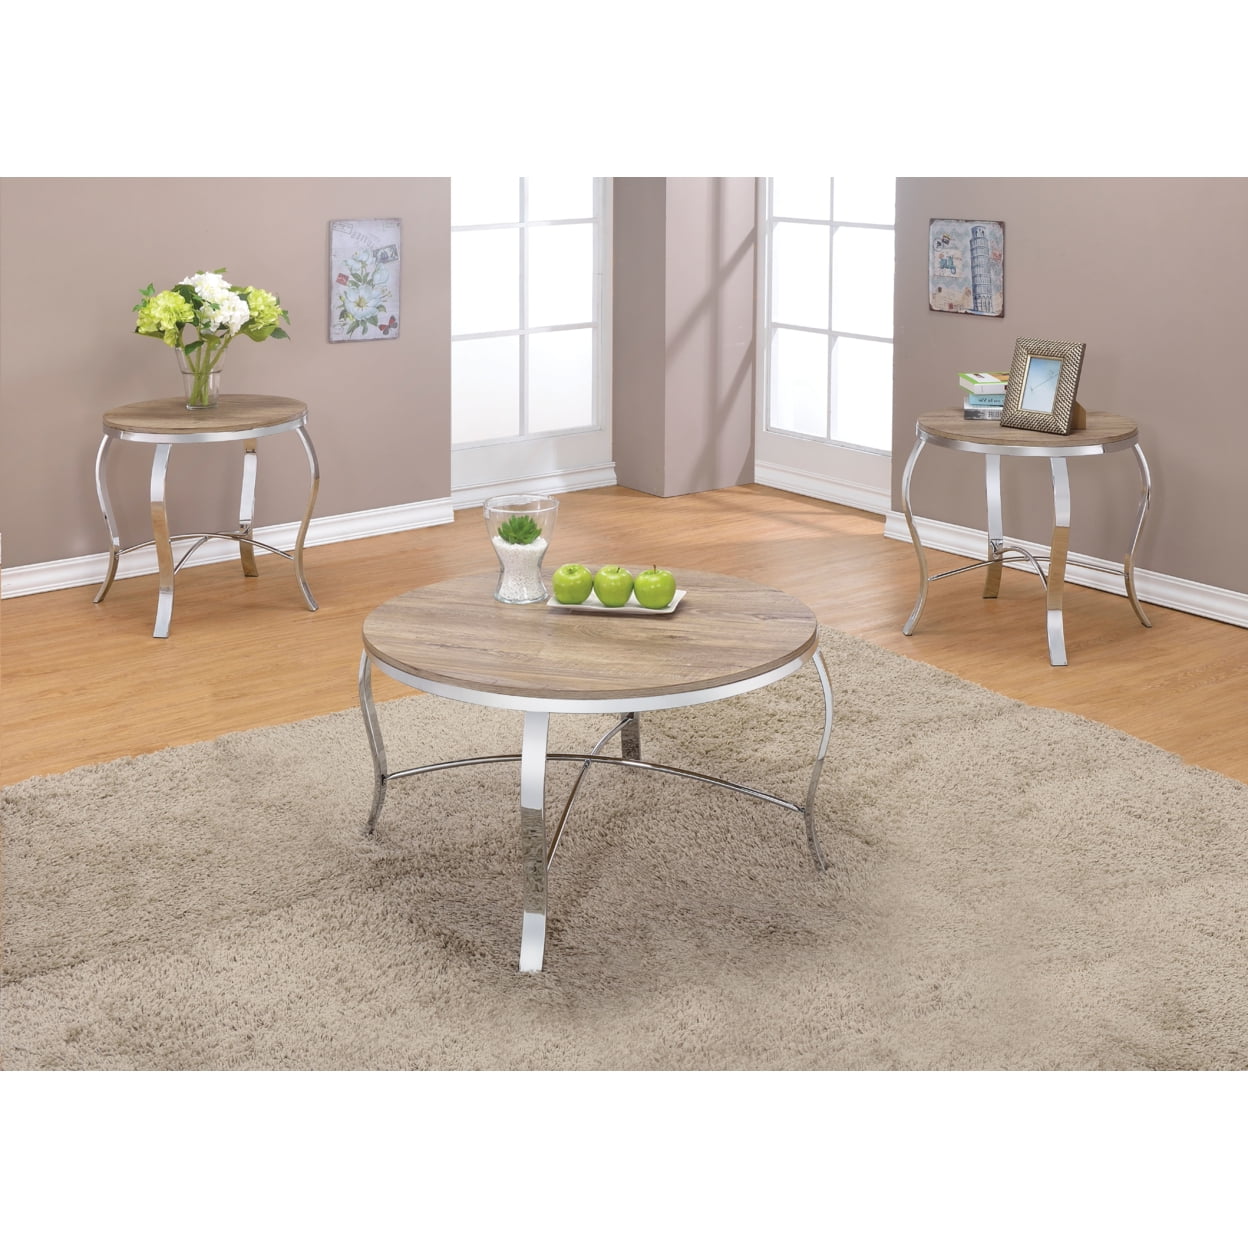 Picture of ACME 81705 3 Piece Malai Coffee & End Table Set - Weathered Light Oak & Chrome